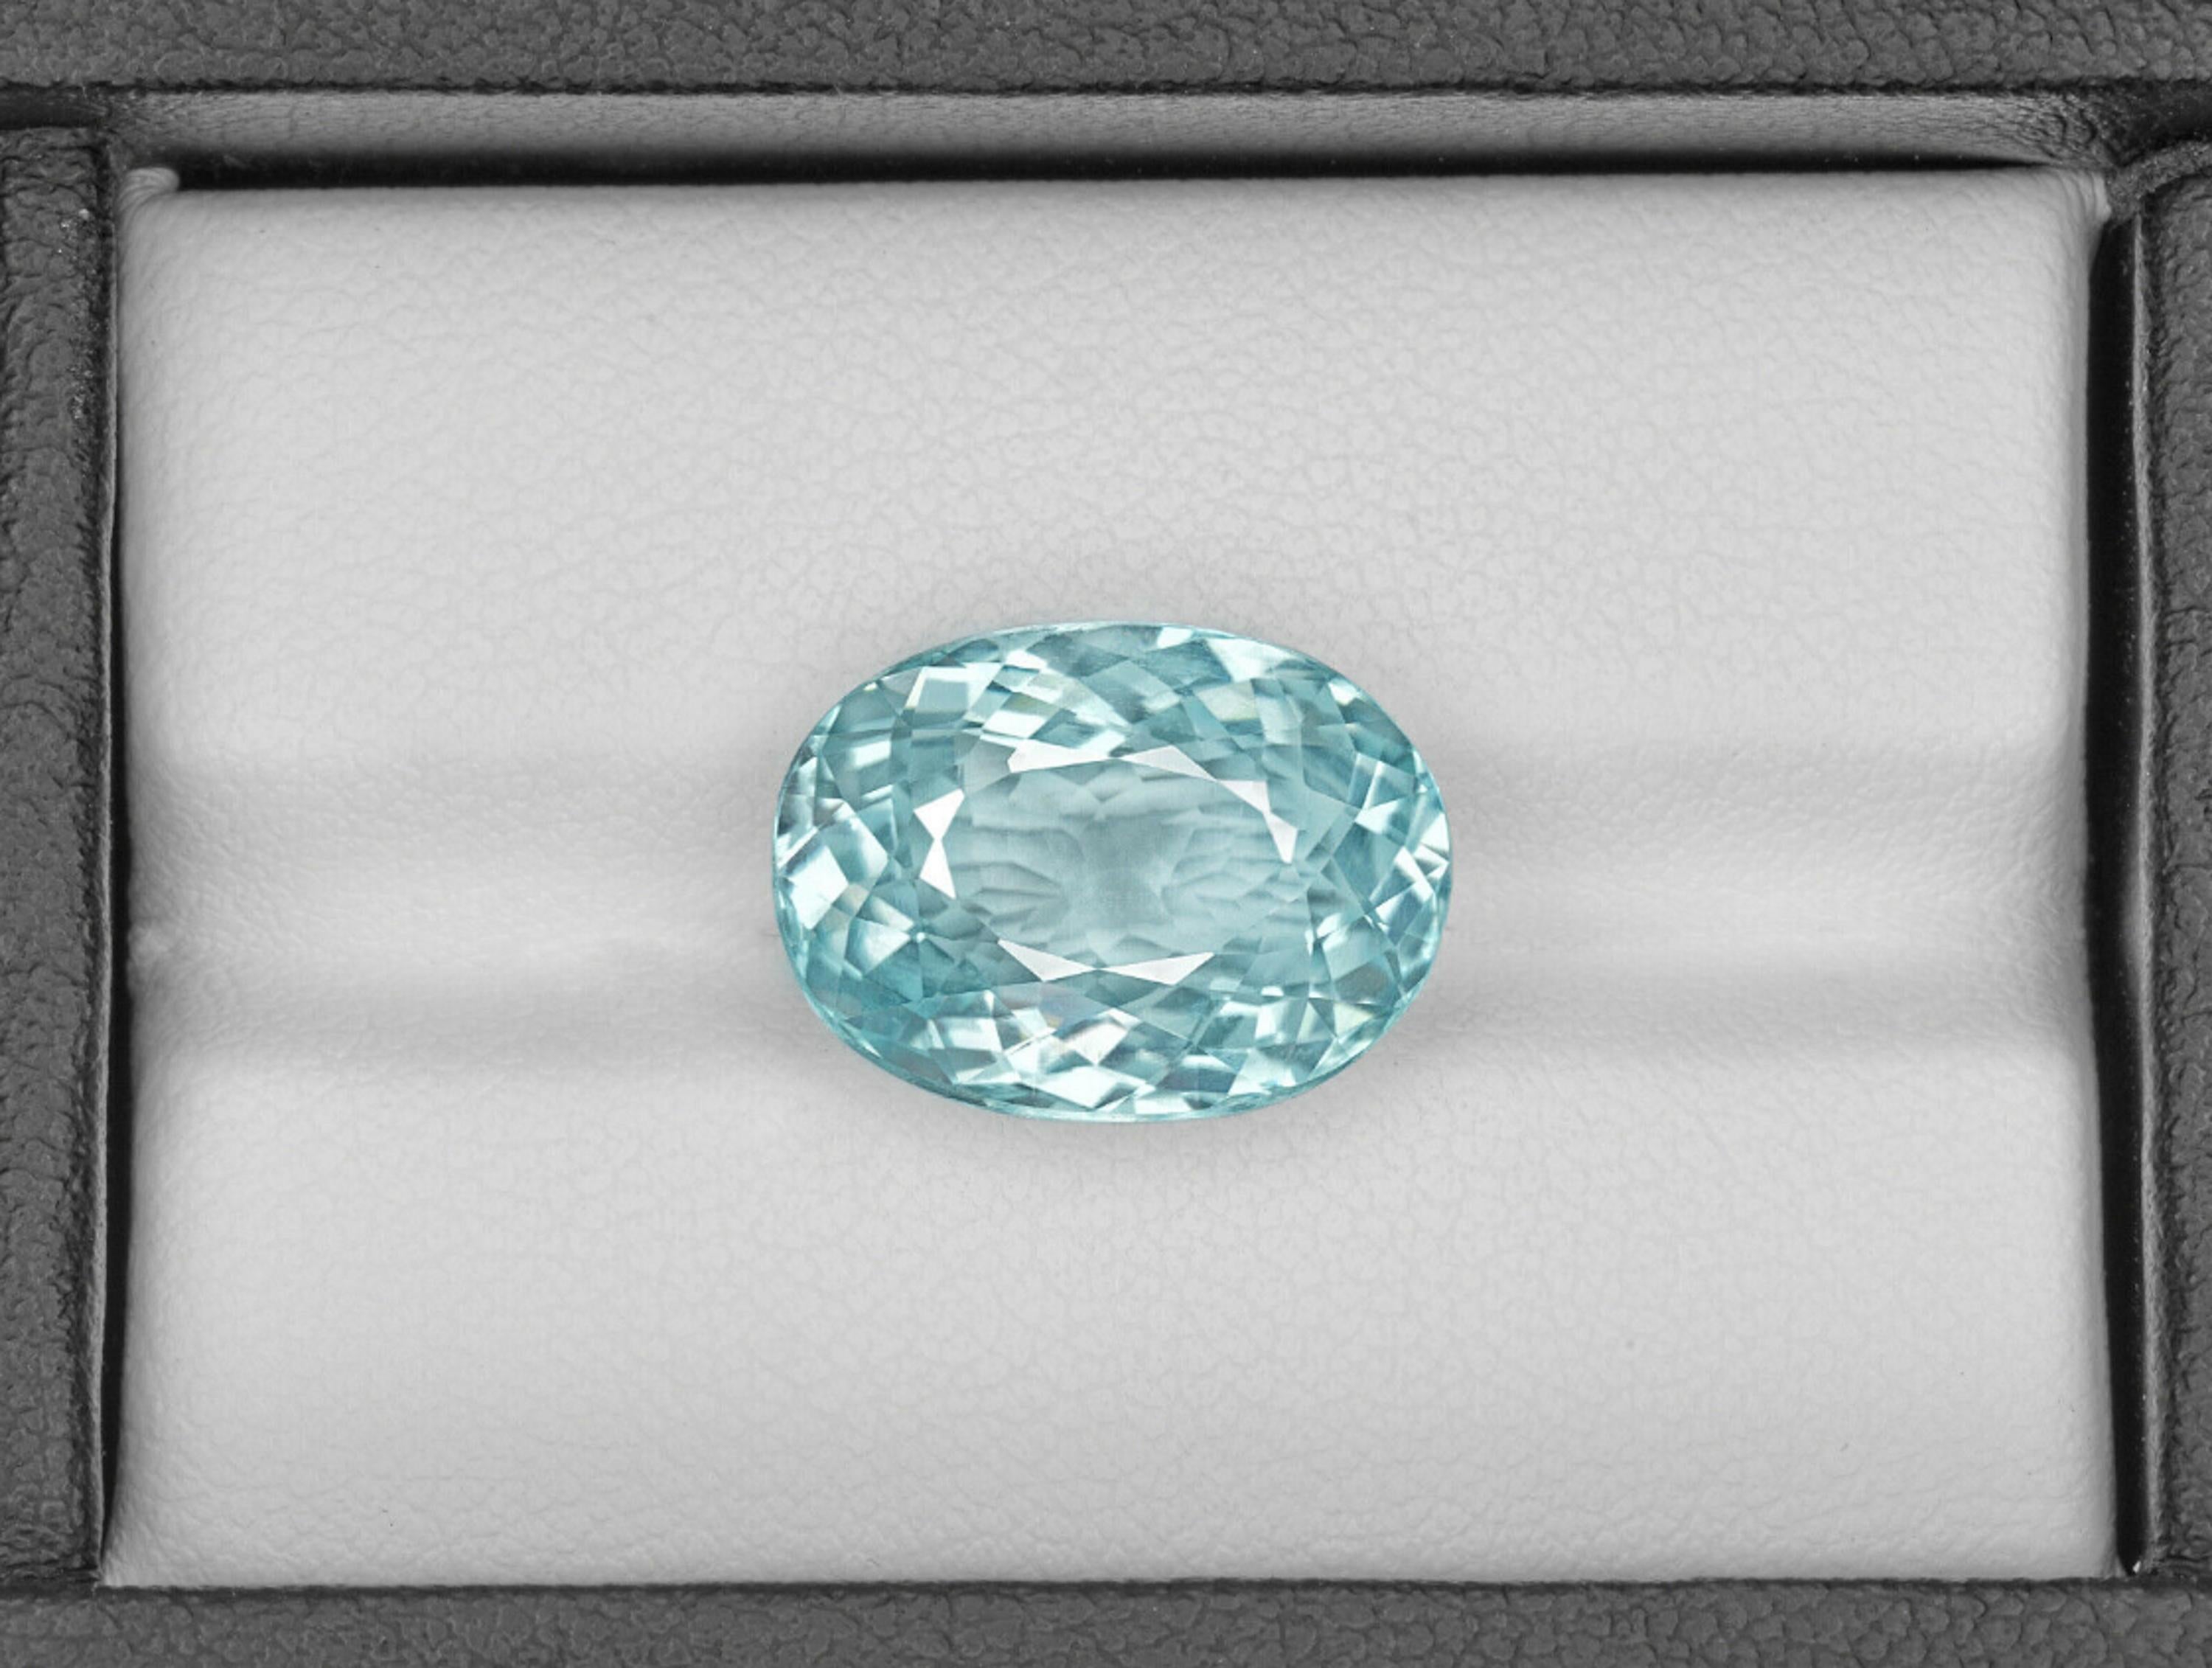 Amazing natural Gia certified authentic paraiba tourmaline with two side half moon natural diamonds.
Inquire us about the sale of the main stone we can make a substancial discount